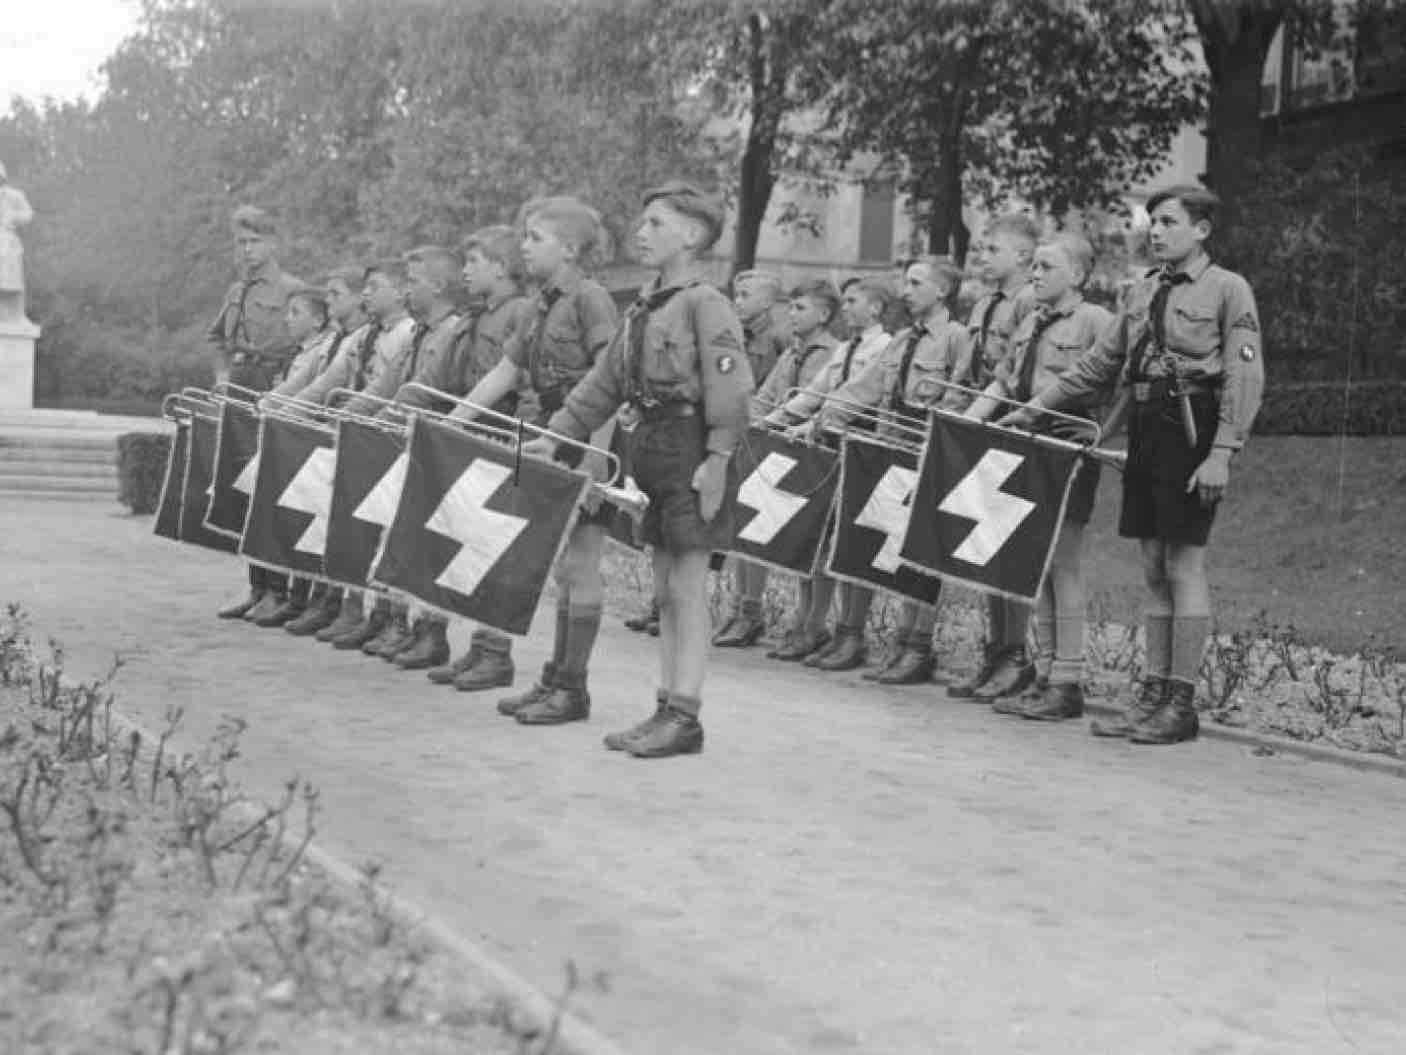 hitler-youth-in-worm-germany-1933-german-federal-archives-wikimedia-commons